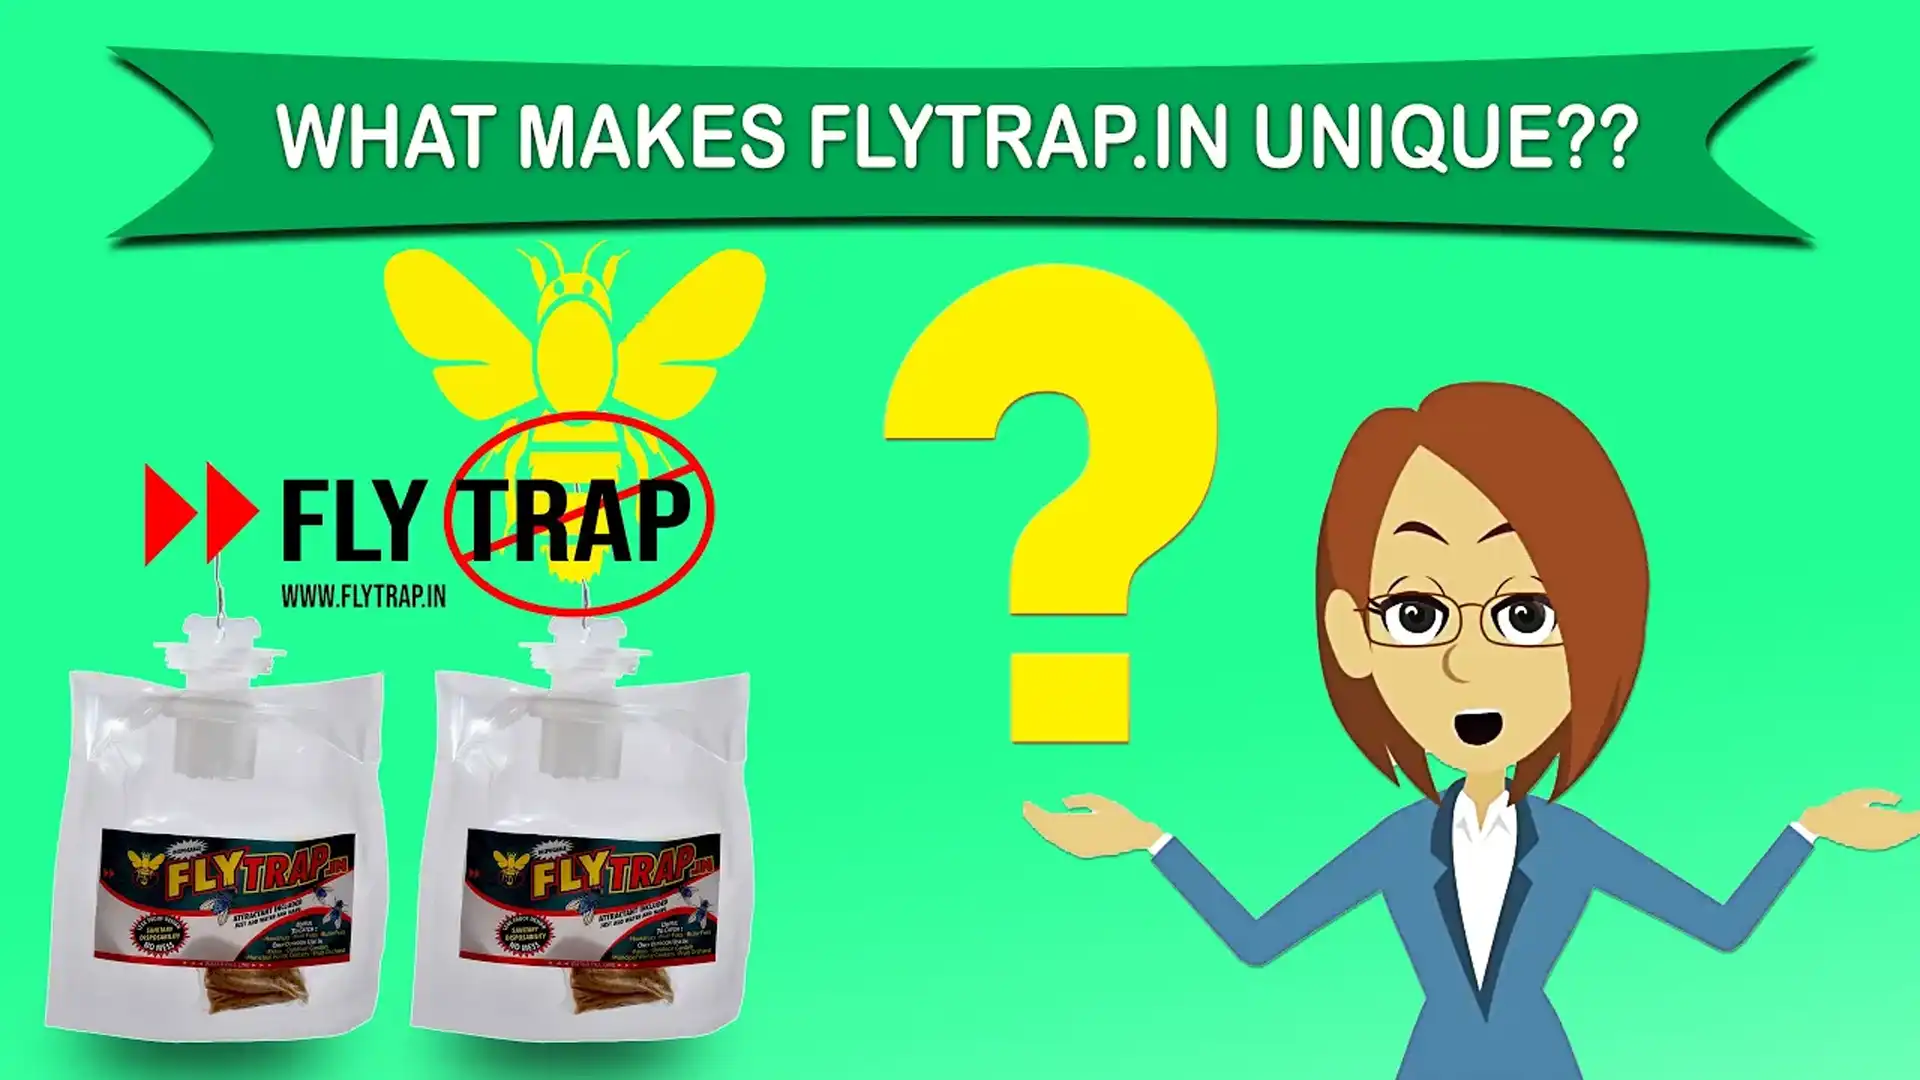 What Are Fly Traps & Why do You Need Them - Detail Explanation of Disposable Fly Traps by FlyTrap.in